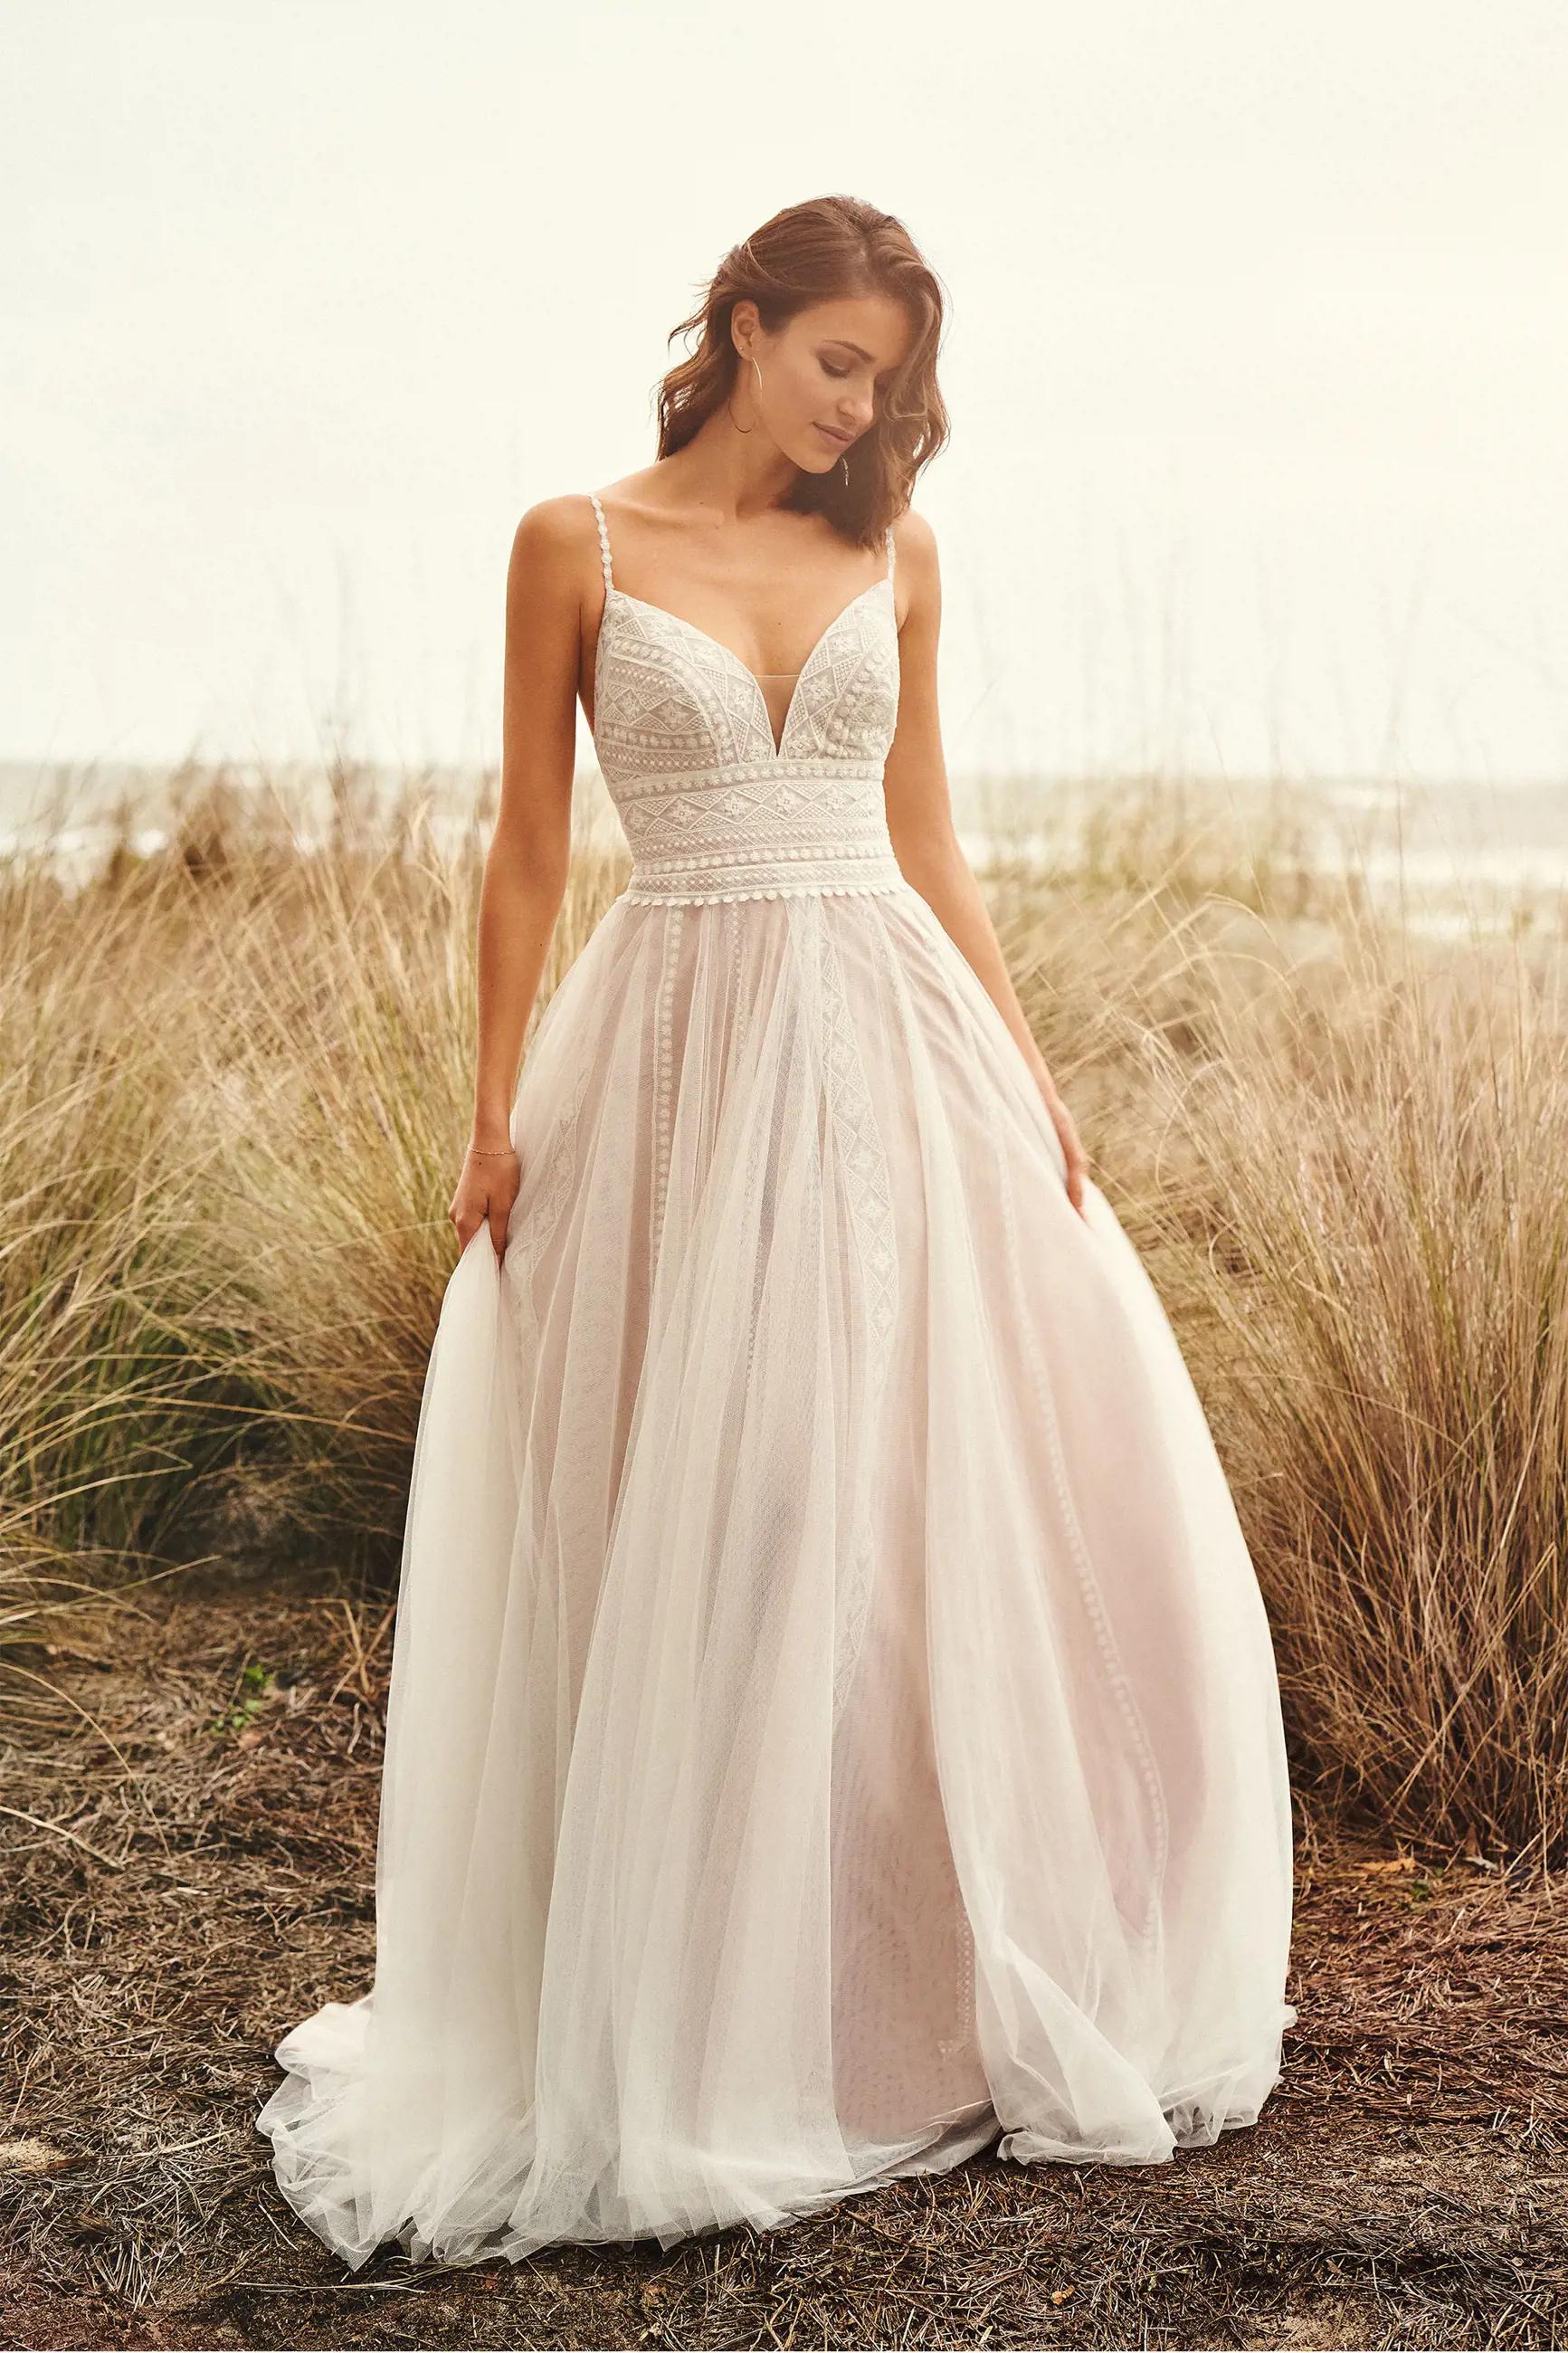 Lighter Color Wedding Dresses for This Season Image